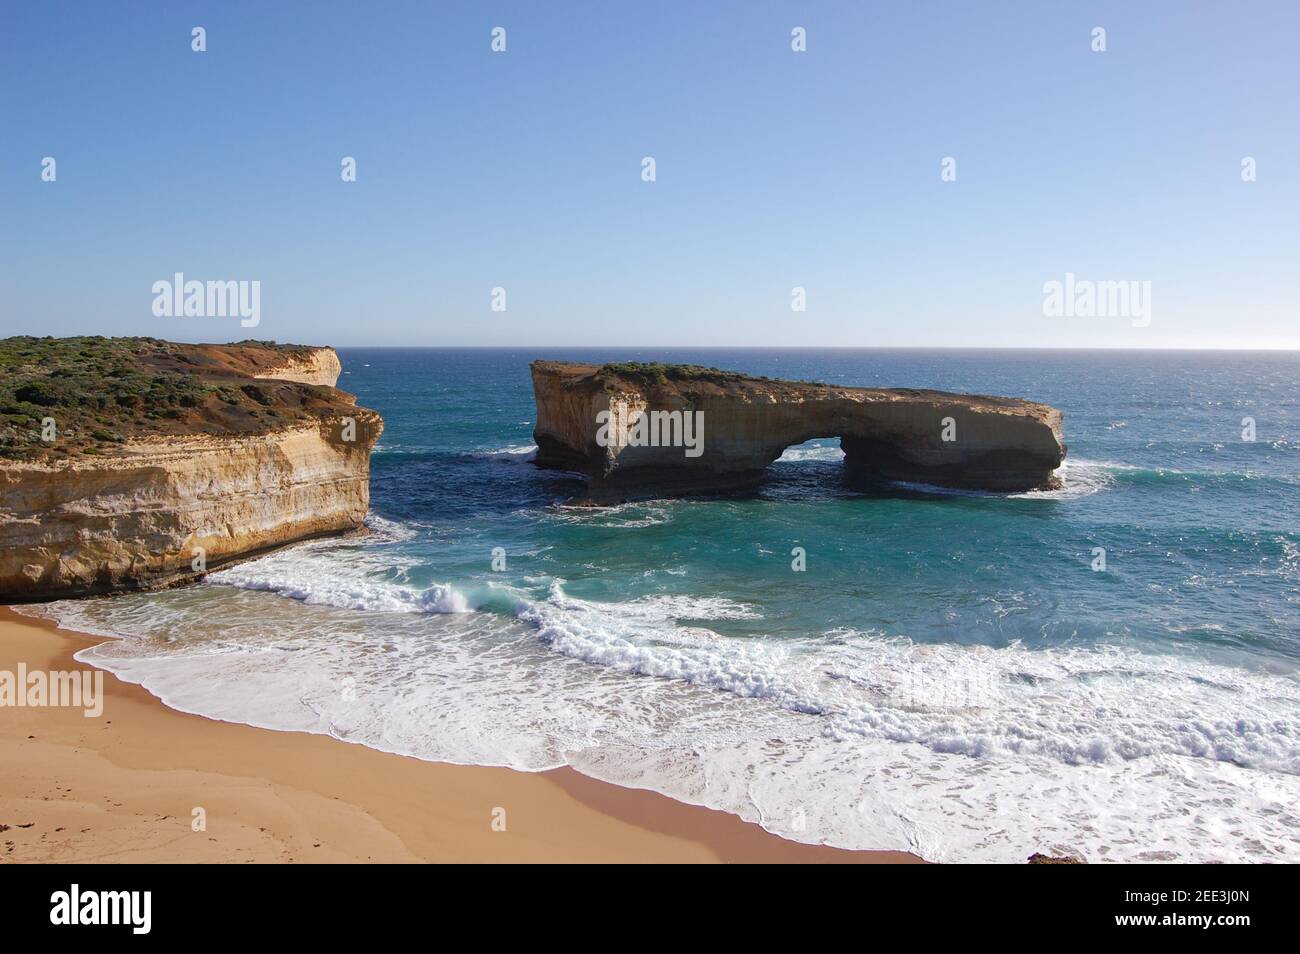 London Bridge, also known as London Arch, is a limestone stack (rock formation) off the shore of Great Ocean Road, Australia Stock Photo